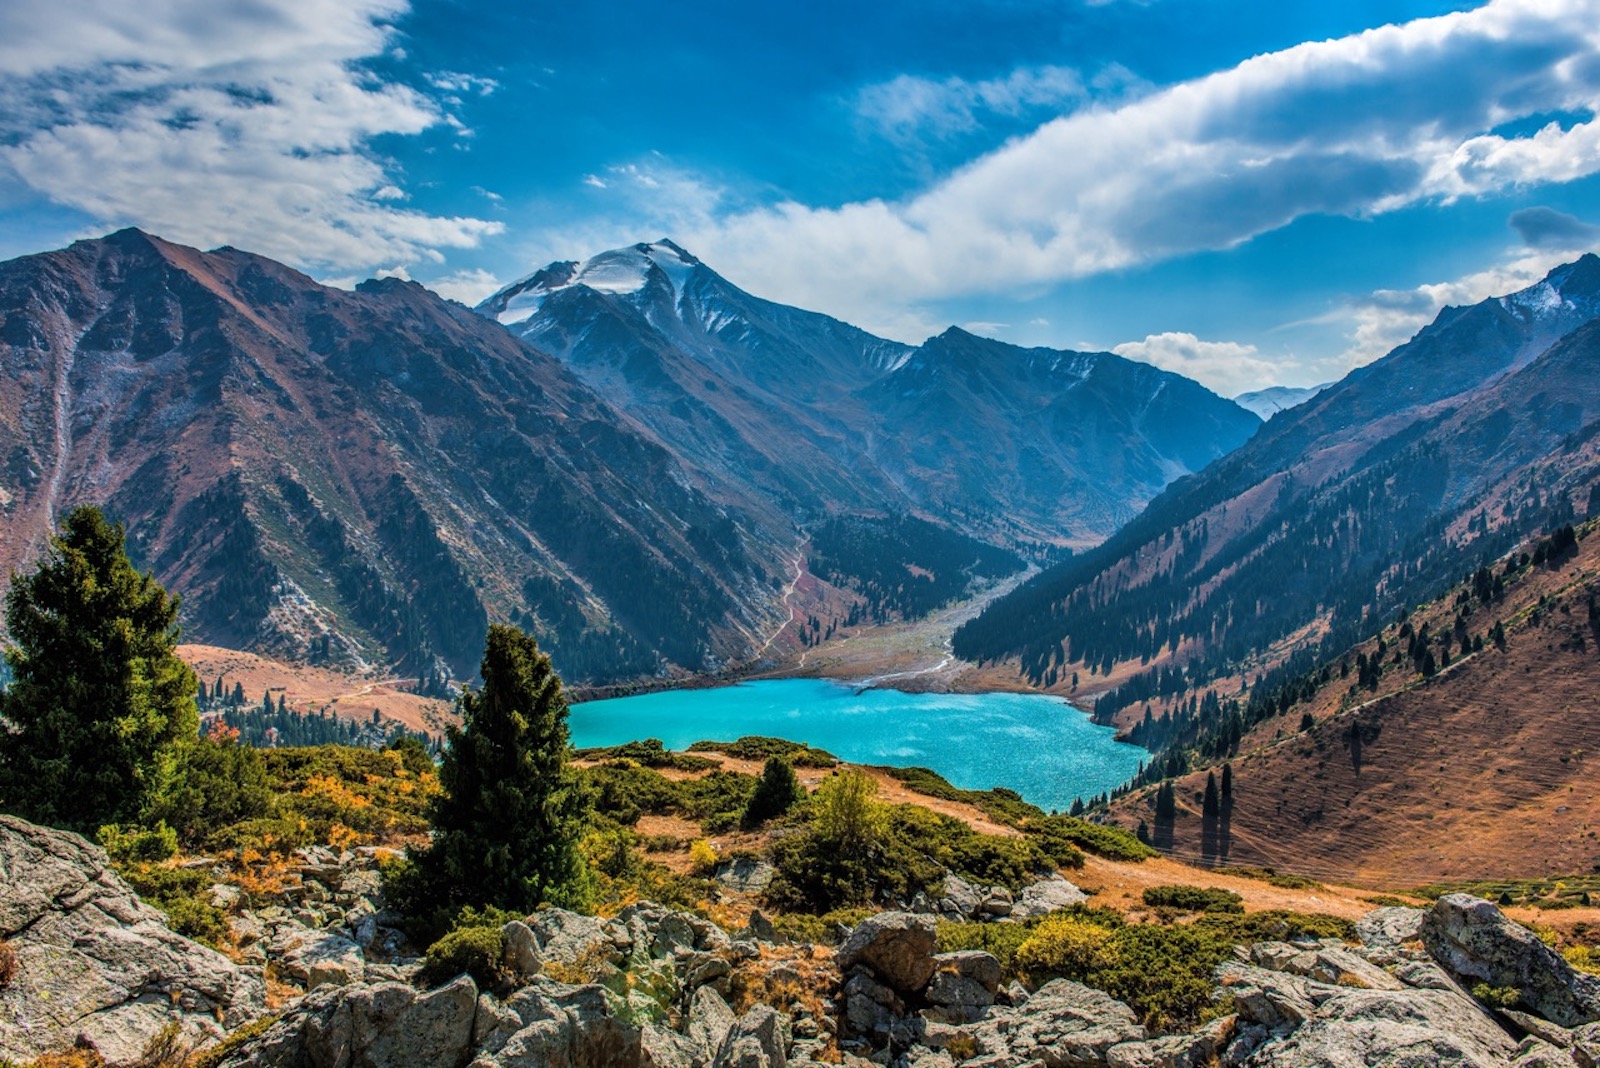 <p>Embark on incredible off-beat adventures by traveling to this hottest tourist spot in Asia.</p><p>Recently, Kazakhstan won the most trending tourism destination for Indian Travelers award, making it a must-visit spot in case you haven’t touched its grounds yet.</p><p>Add Charyn Canyon, Kolsai Lakes, a one-day trip to Korgalzhyn Nature Reserve, and ice skating near Ile-Alatau National Park to your bucket list for anyone looking beyond ordinary experiences.</p>